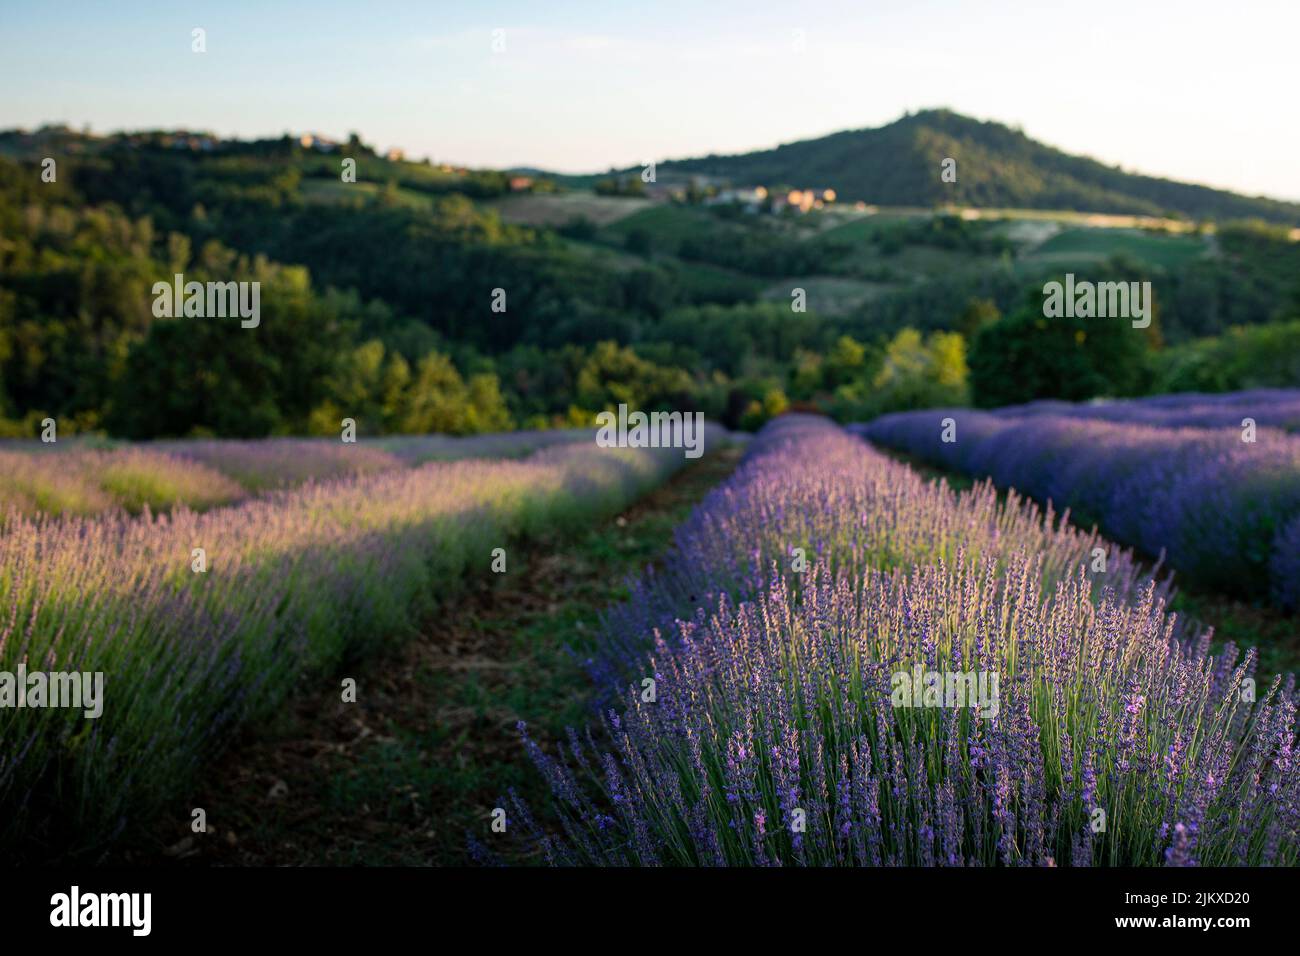 Lavender field in bloom at sunset with hills in the background. Selective focus. Oltrepo' Pavese, northern Italy. Stock Photo